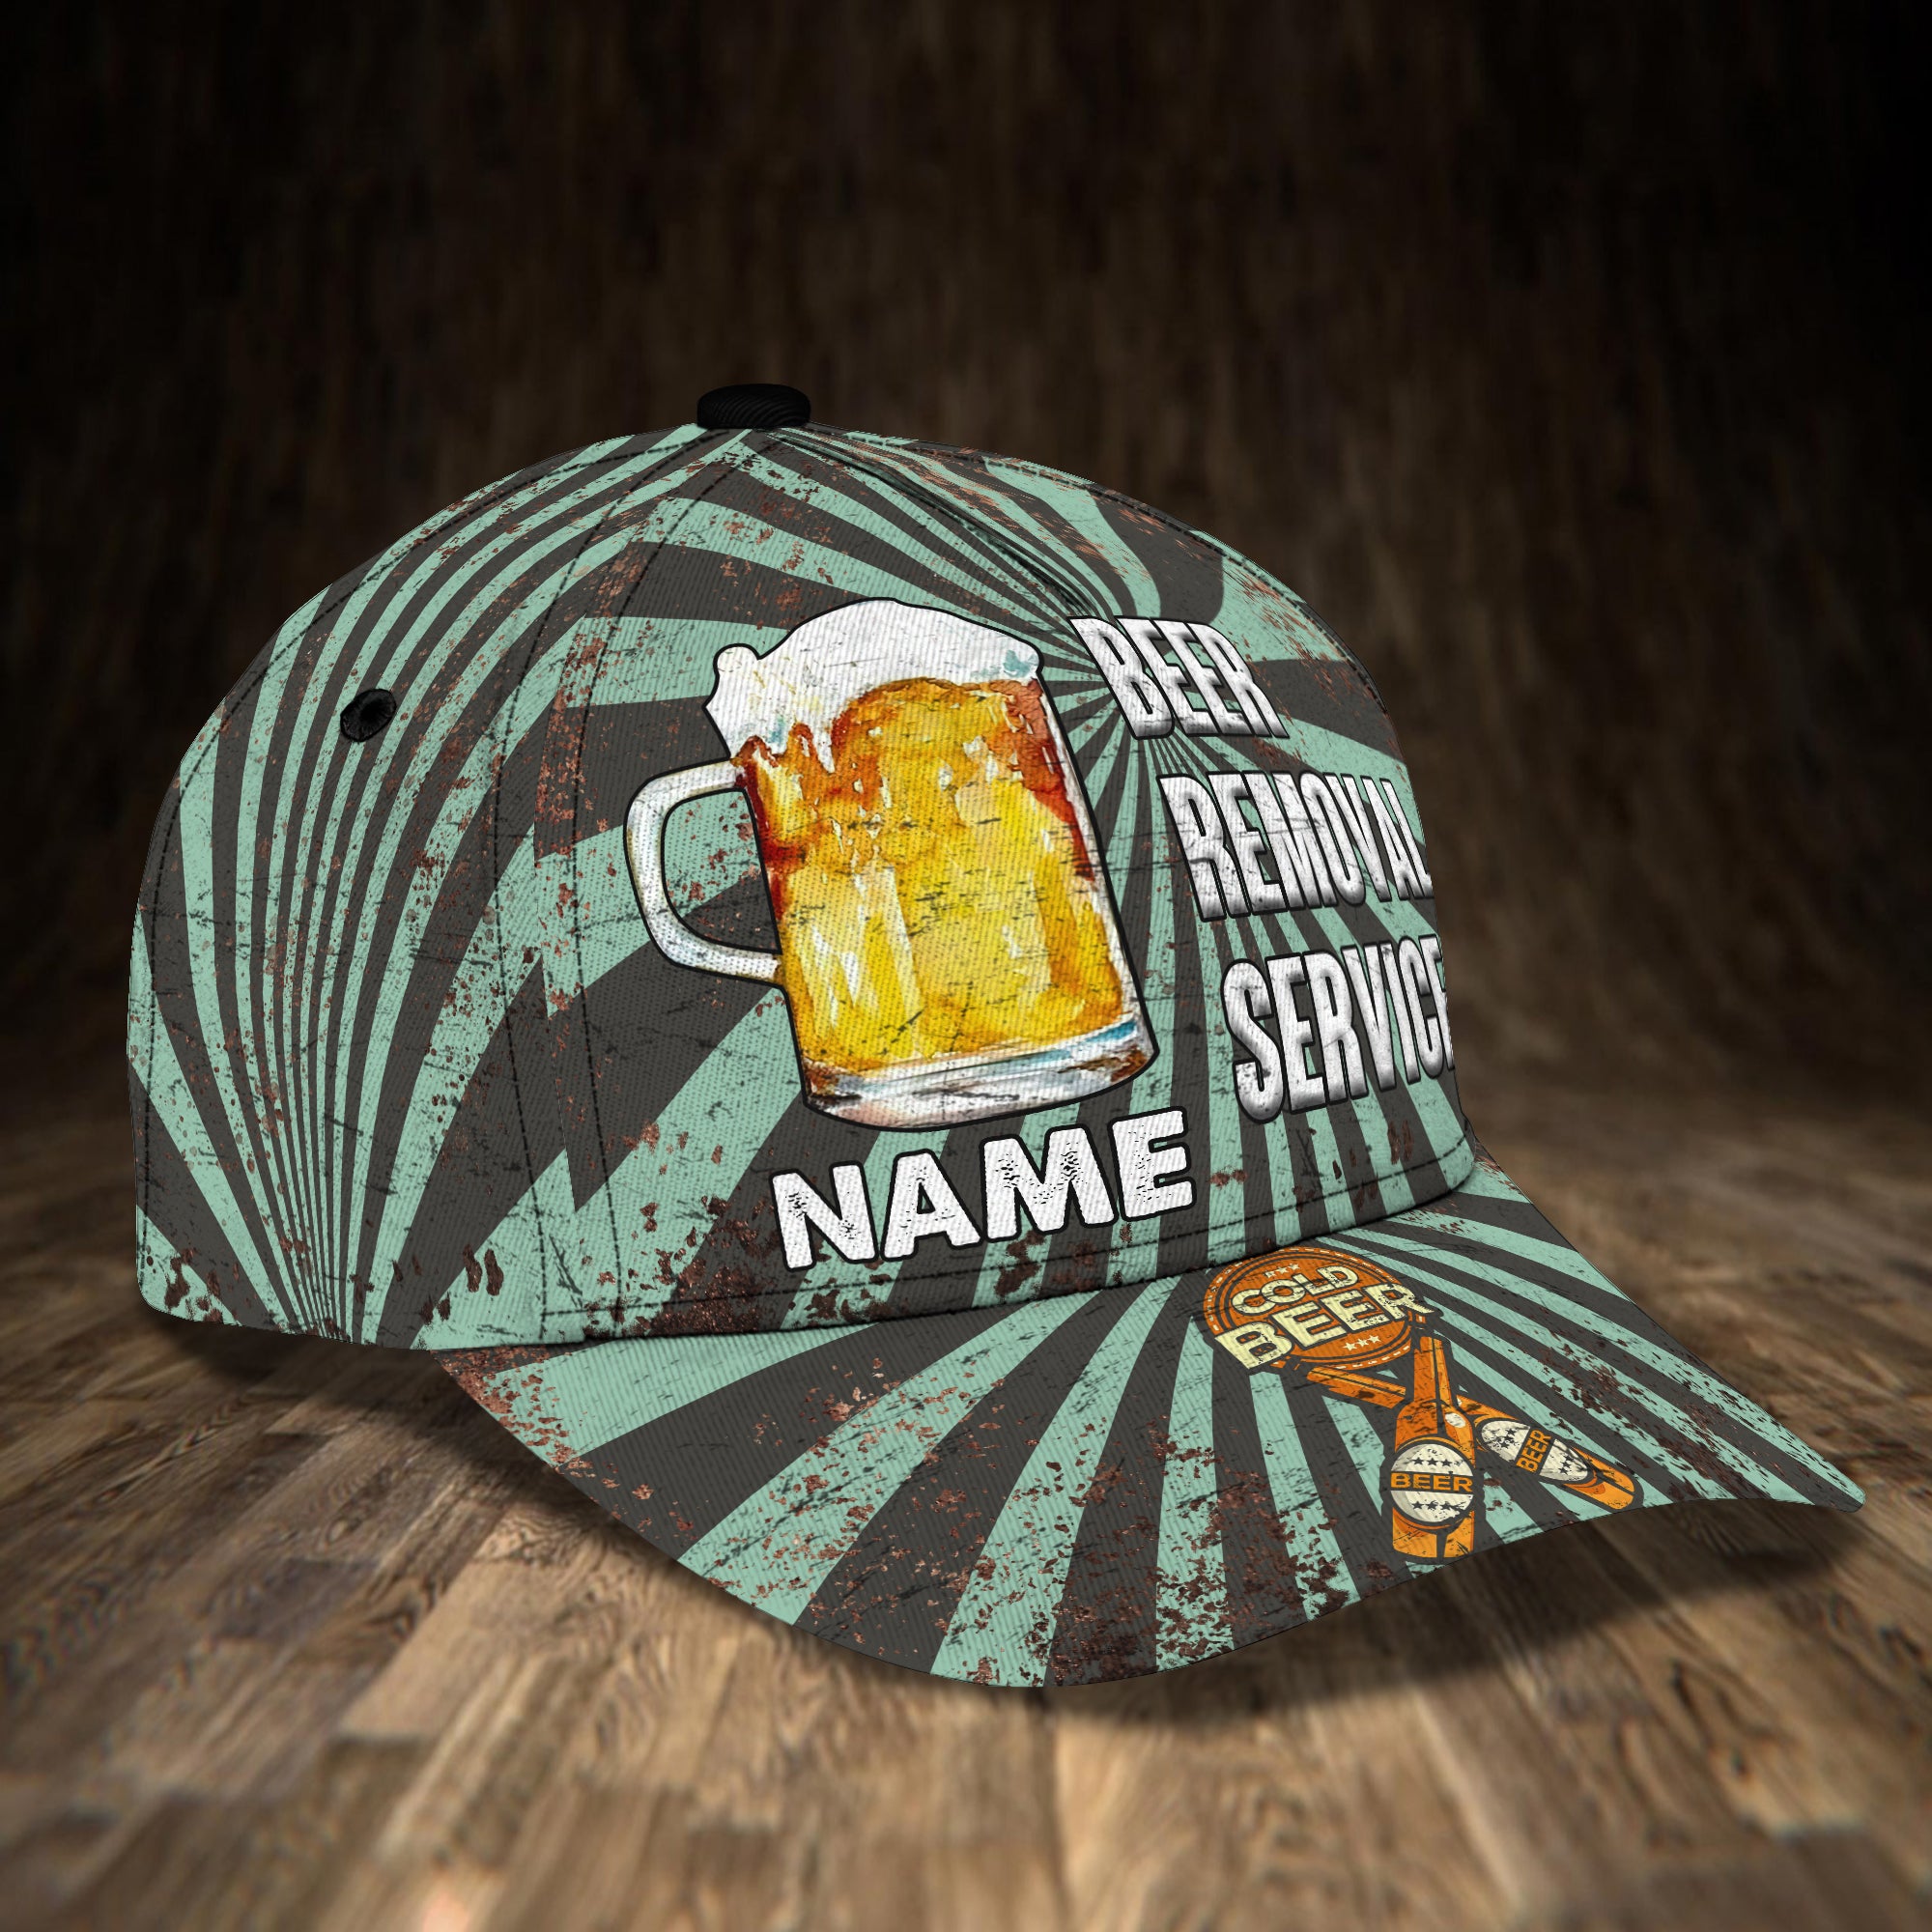 Beer Removal Service- Personalized Name Cap - Loop- T2k-266